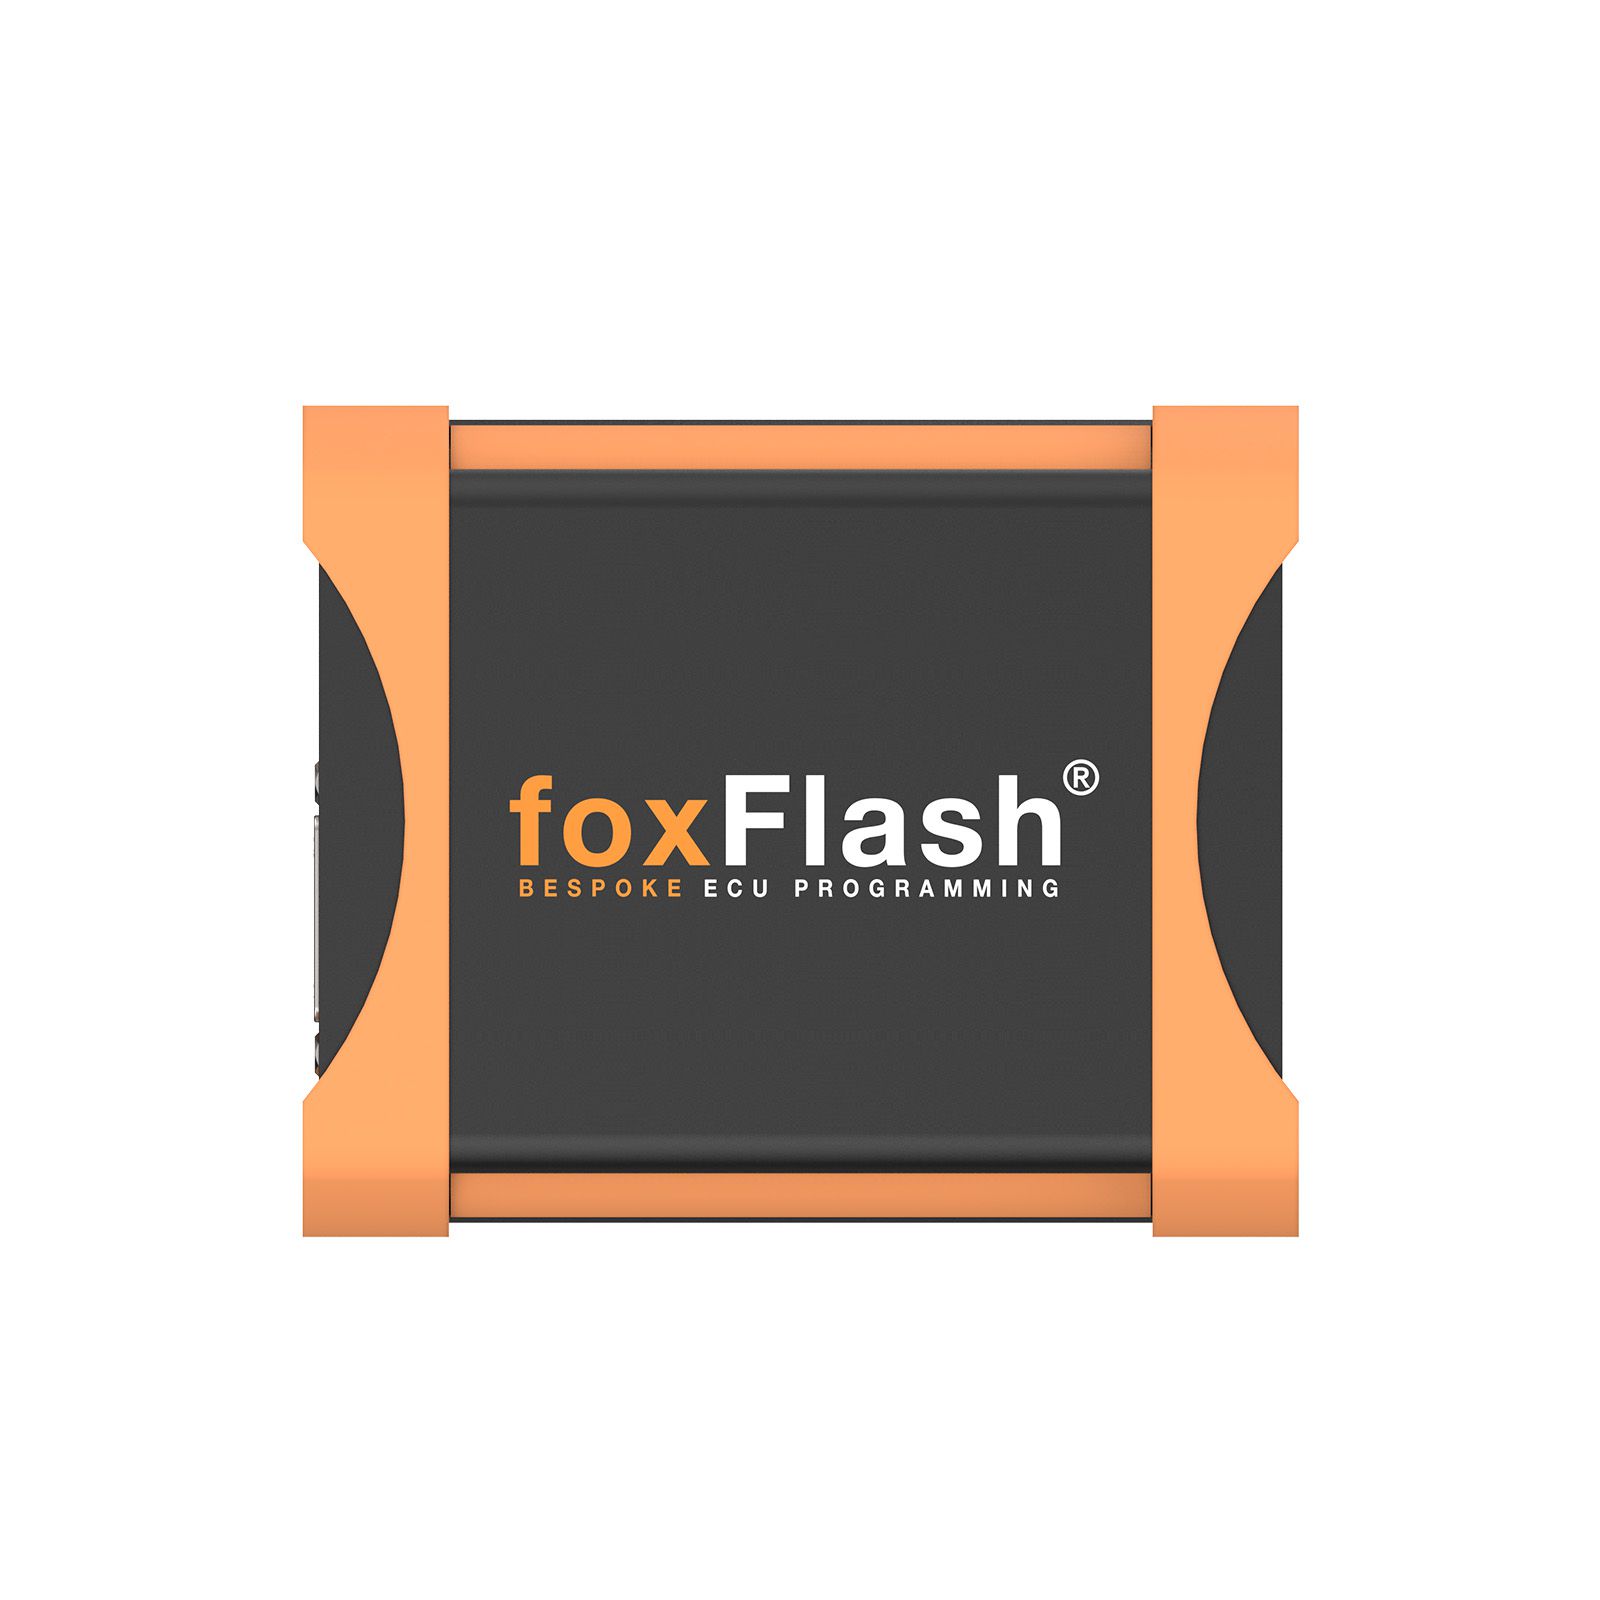 FoxFlash Master Version Super Strong ECU TCU Clone Chip Tuning Tool Support Checksum with WinOLS 4.70 Damos2020 Get Free Gifts